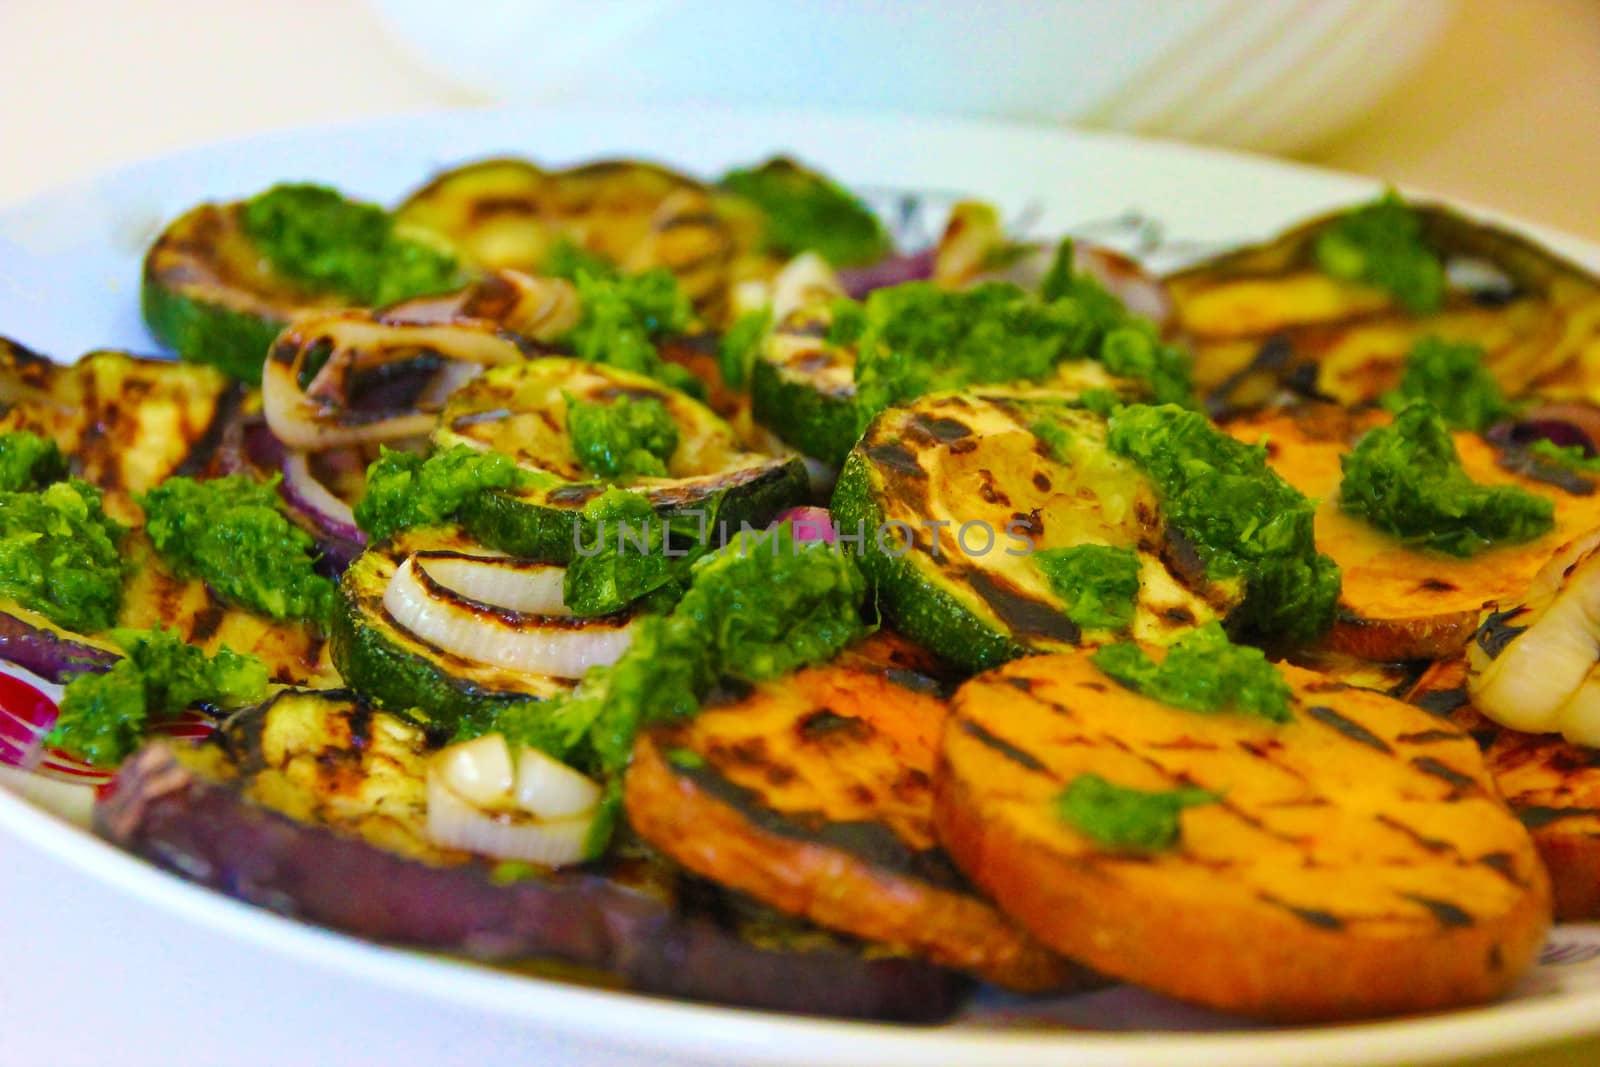 Grilled red potatoes, onions,courgettes and aubergines covered with coriander-basil pesto and olive oil. A popular Mediterranean dish.